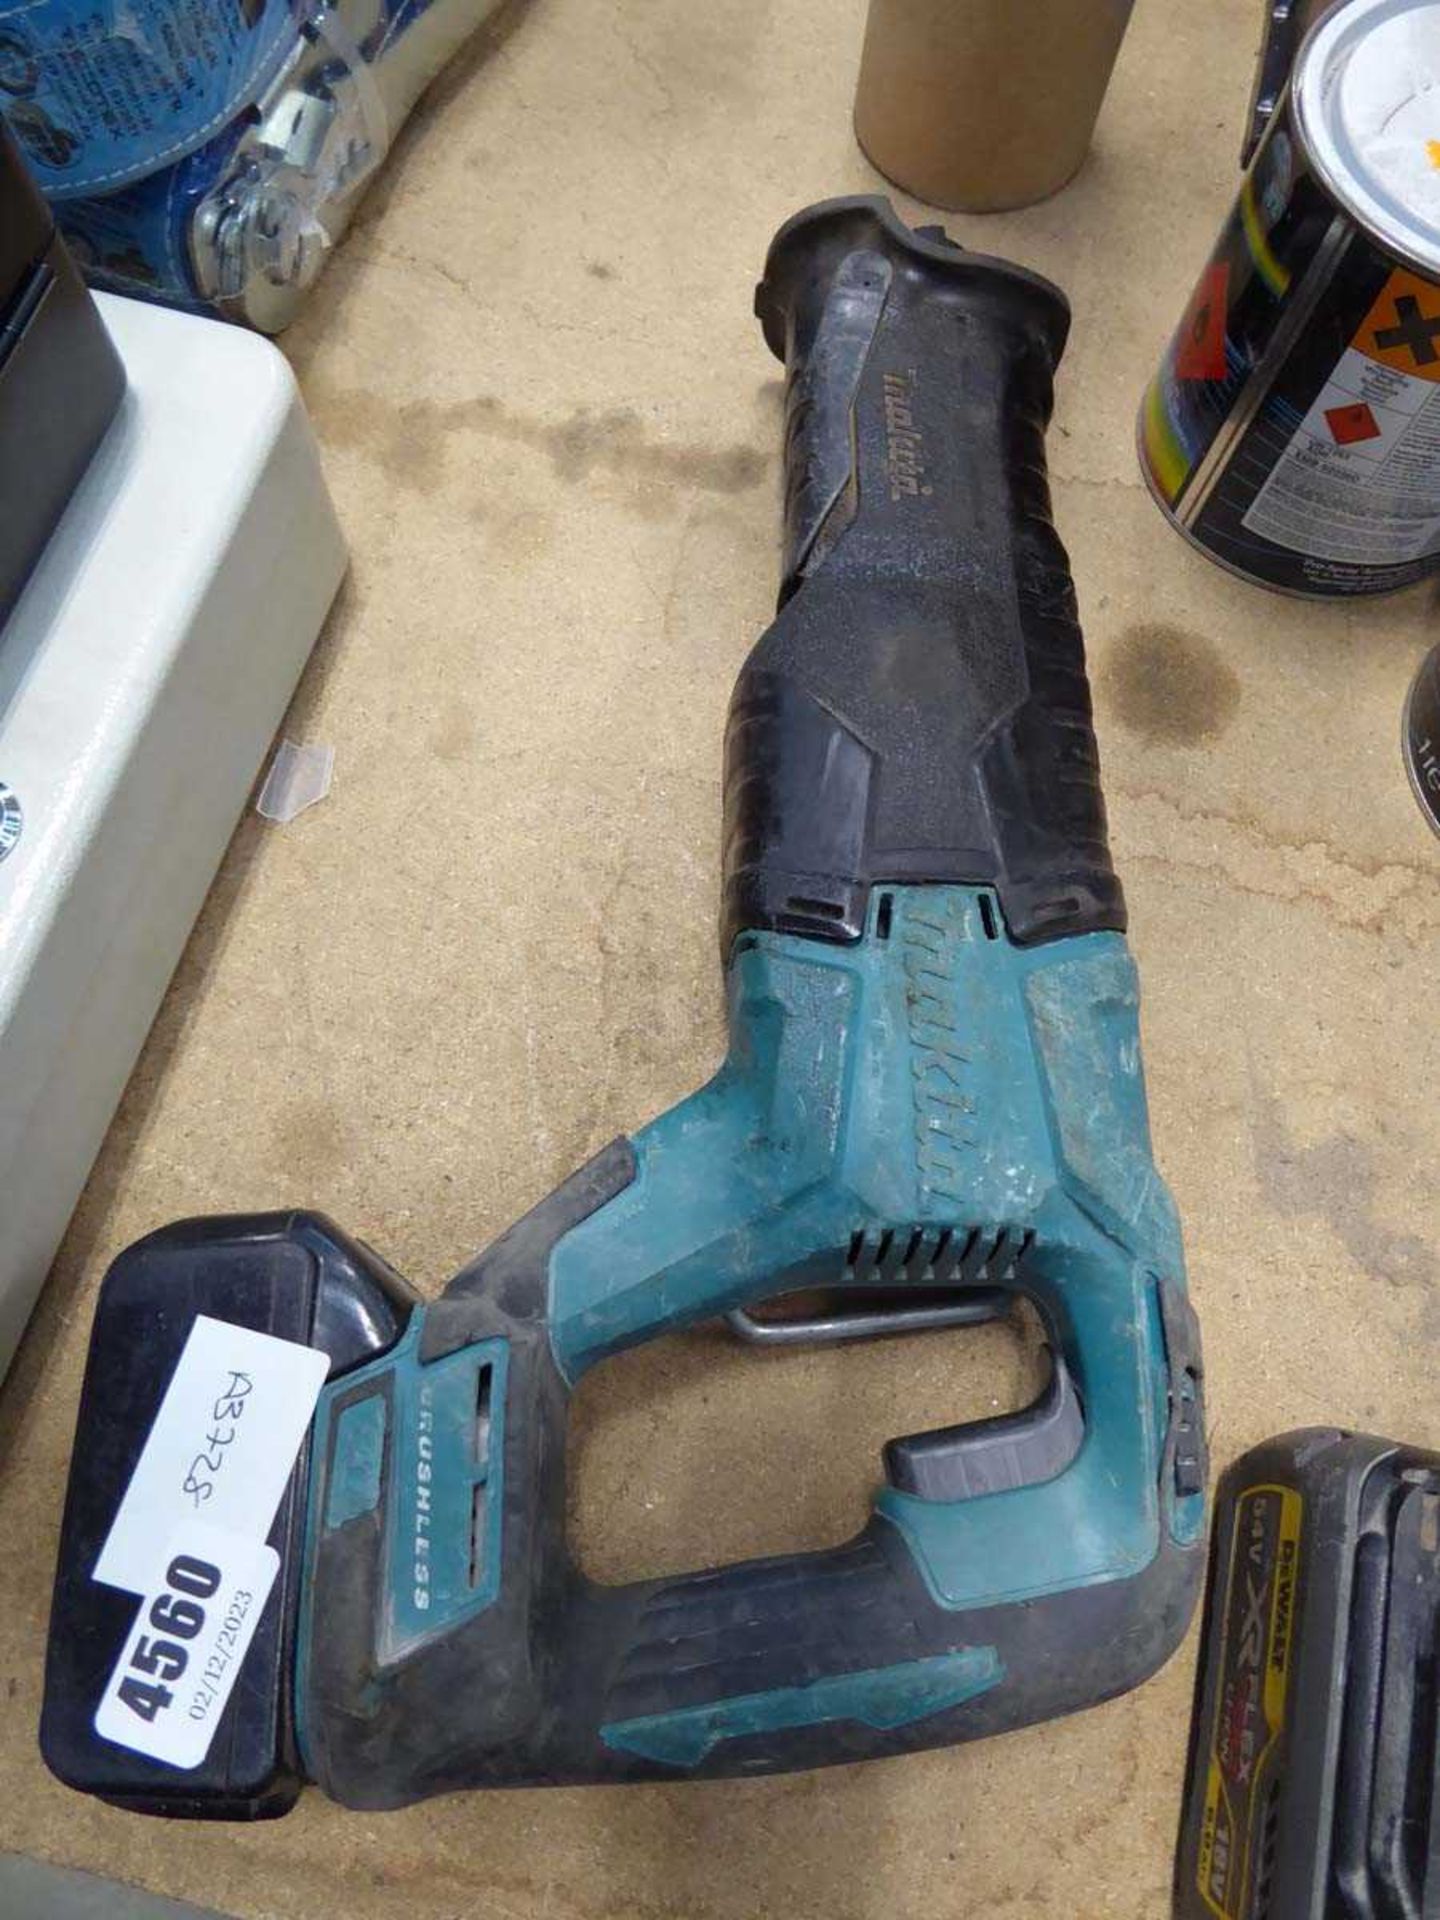 Makita reciprocating saw with one battery, no charger